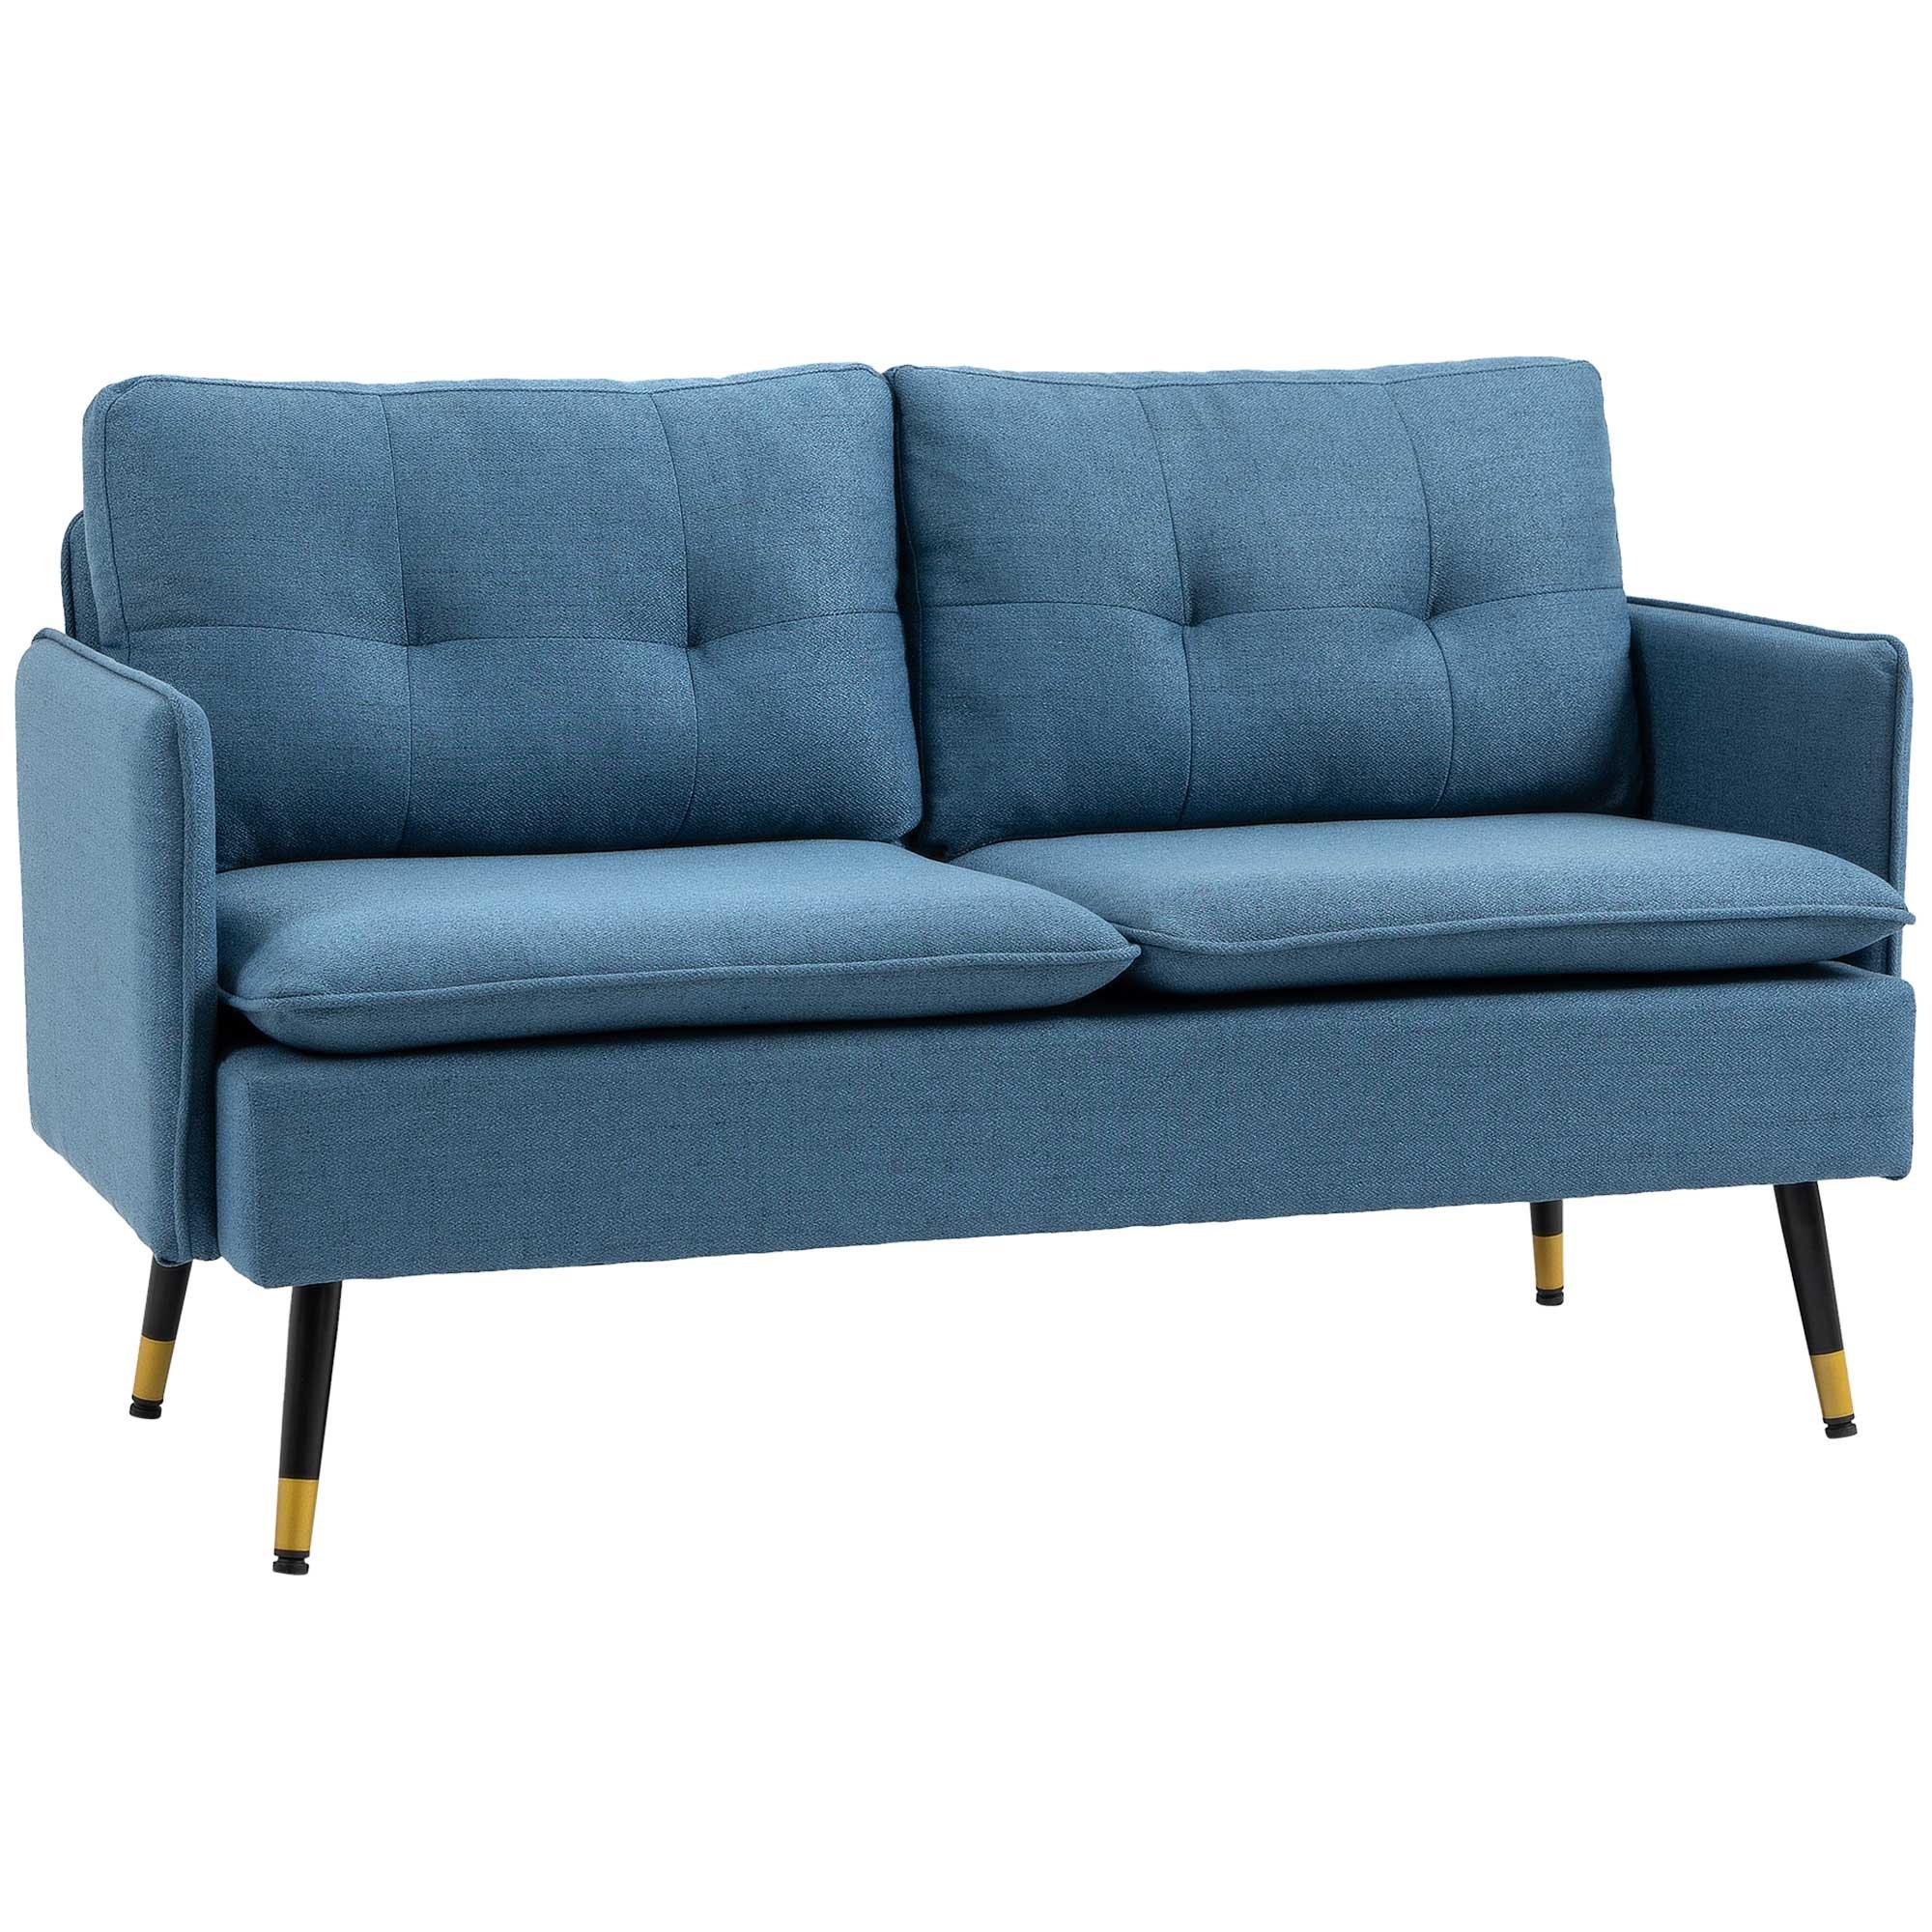 Two Seater Sofa with Steel Legs Button Tufted Backrest for Living Room